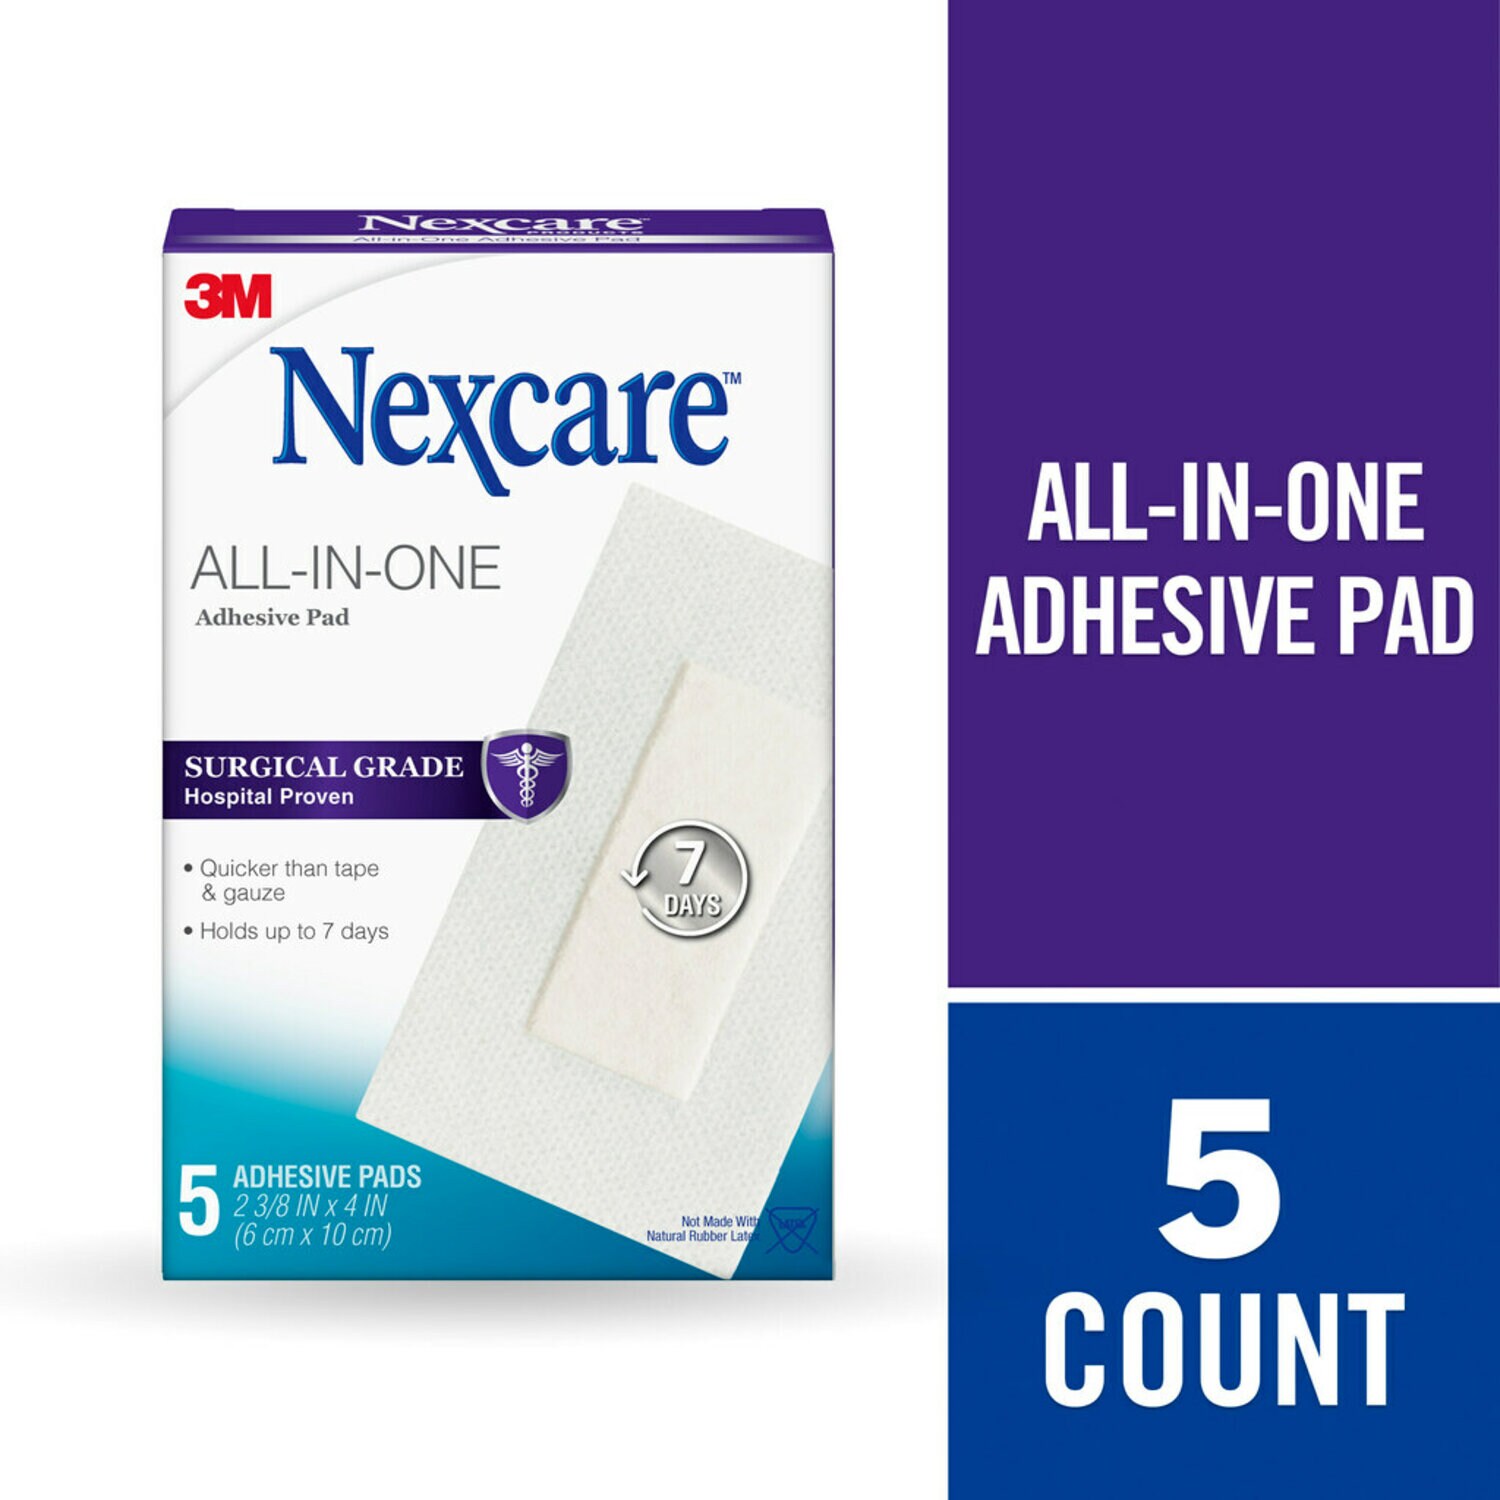 7100223125 - Nexcare All-in-One Adhesive Pad H3564, 2 3/8 in x 4 in (6 cm x 10 cm)